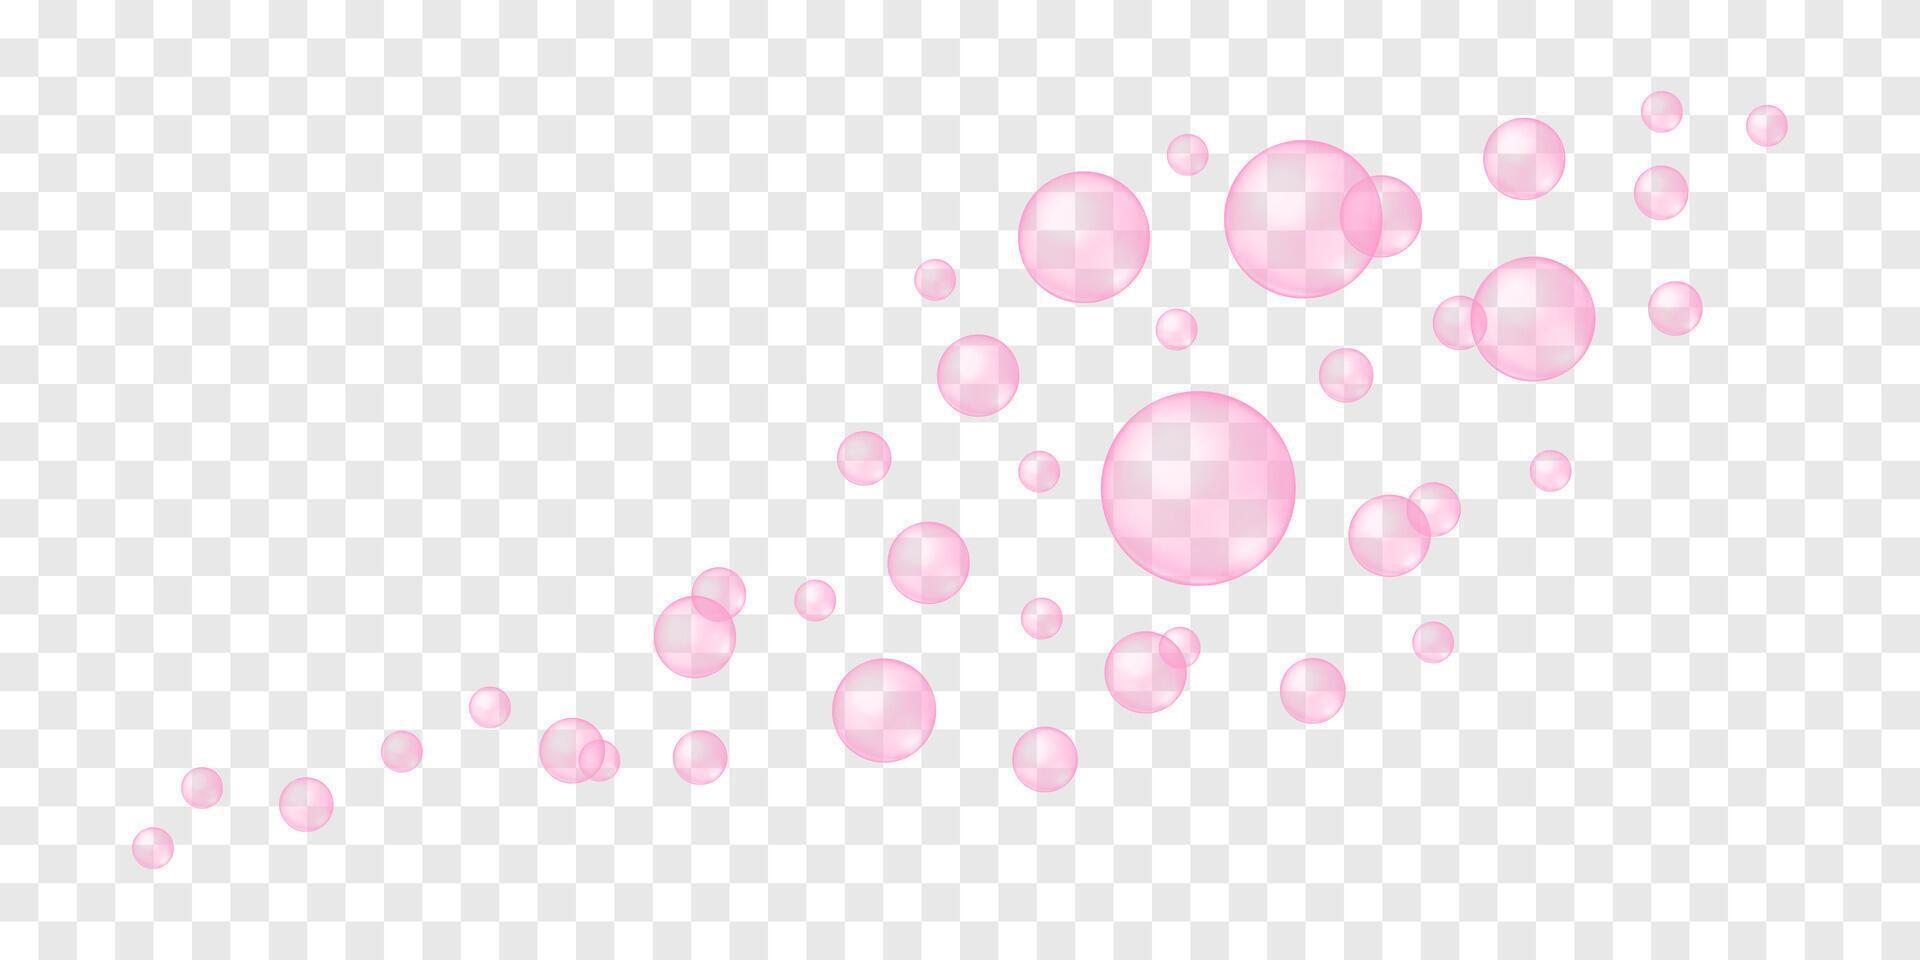 Flying or foating pink bubbles. Soap foam, bath suds, cleanser texture. Fizzy cherry or strawberry drink, champagne, sparkling wine vector